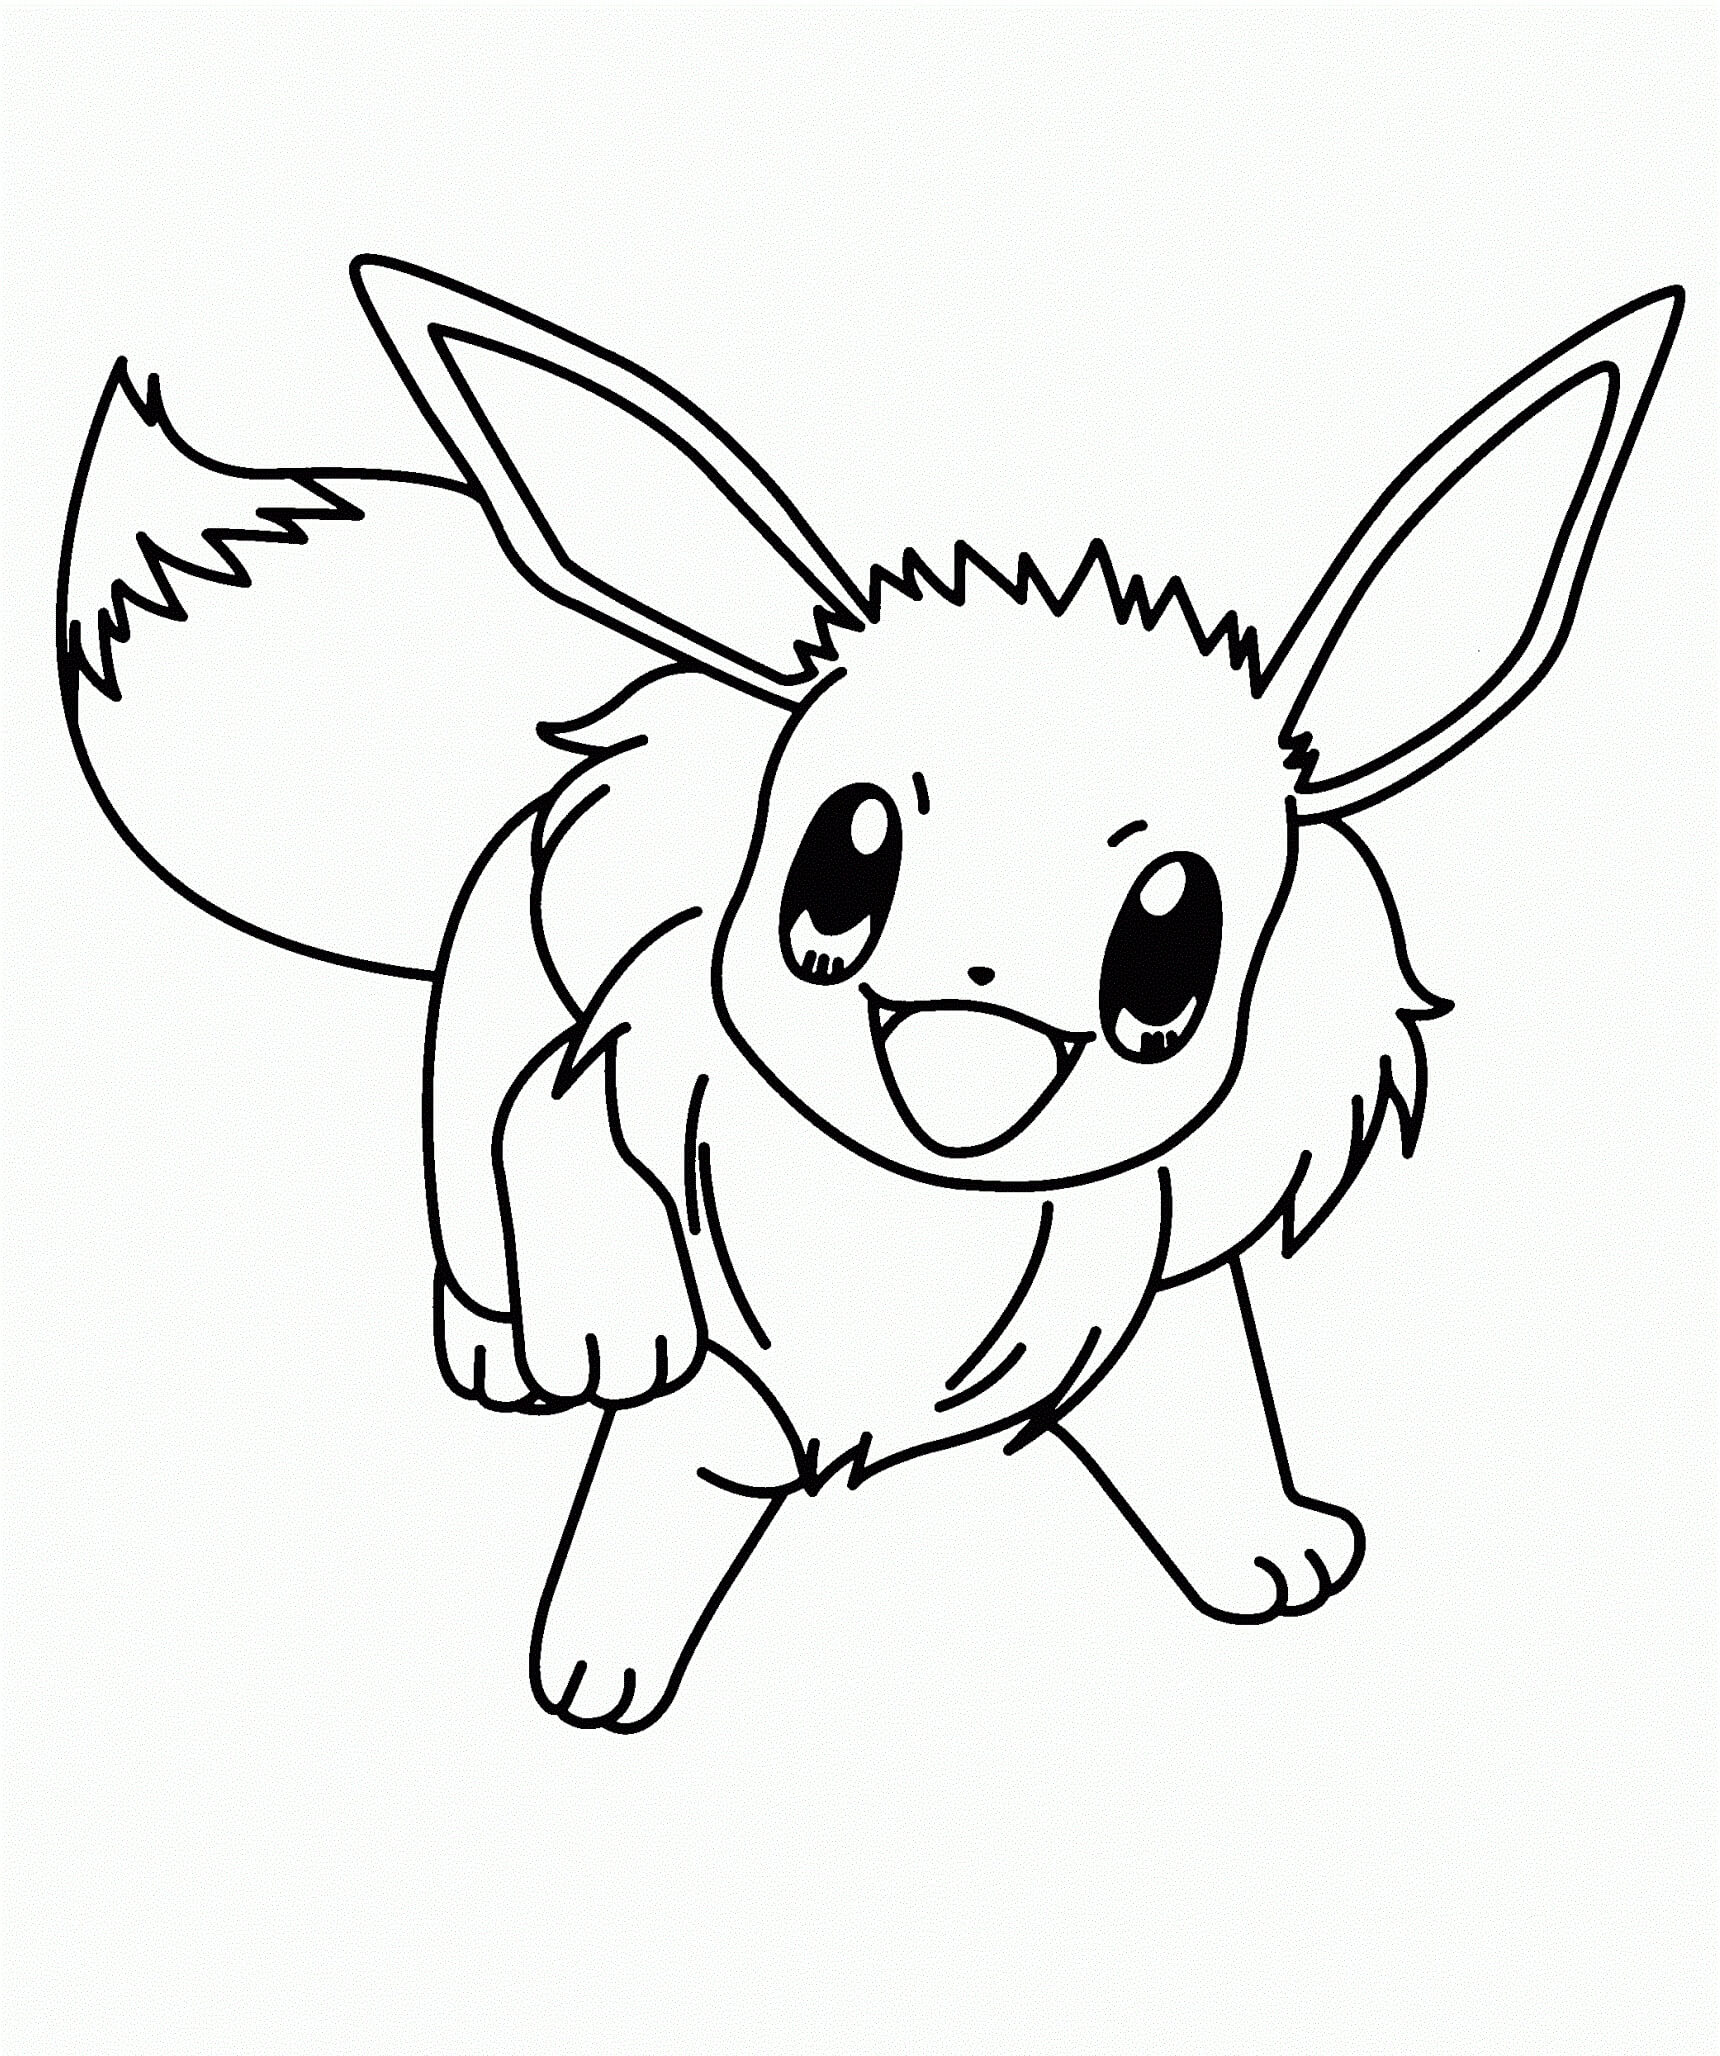 Eevee wants to play coloring page